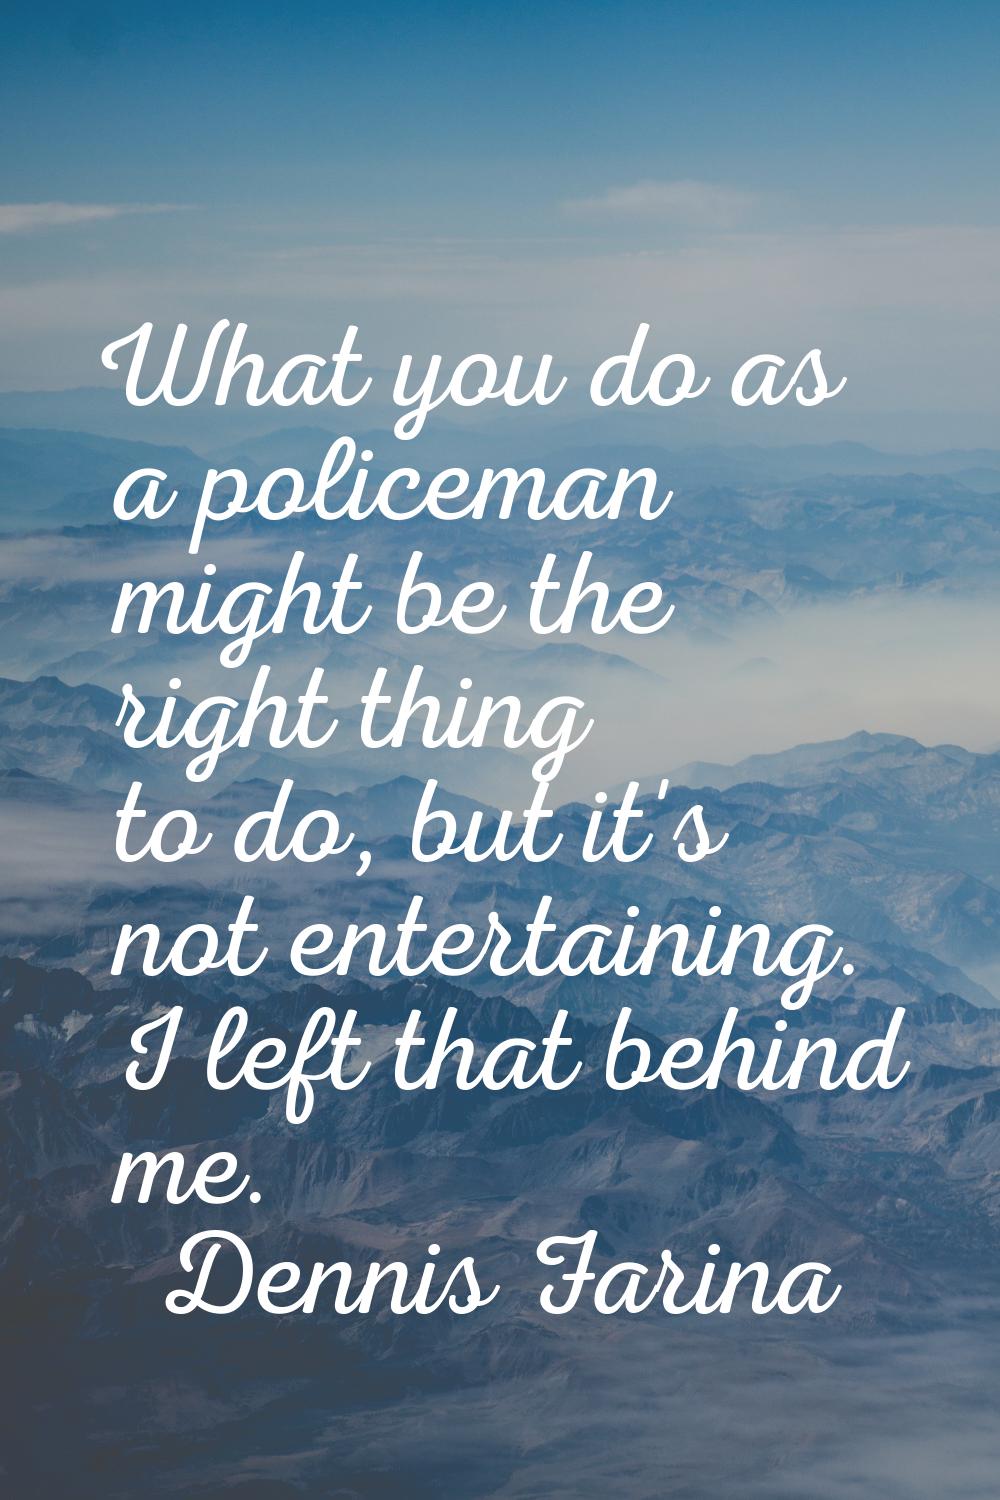 What you do as a policeman might be the right thing to do, but it's not entertaining. I left that b